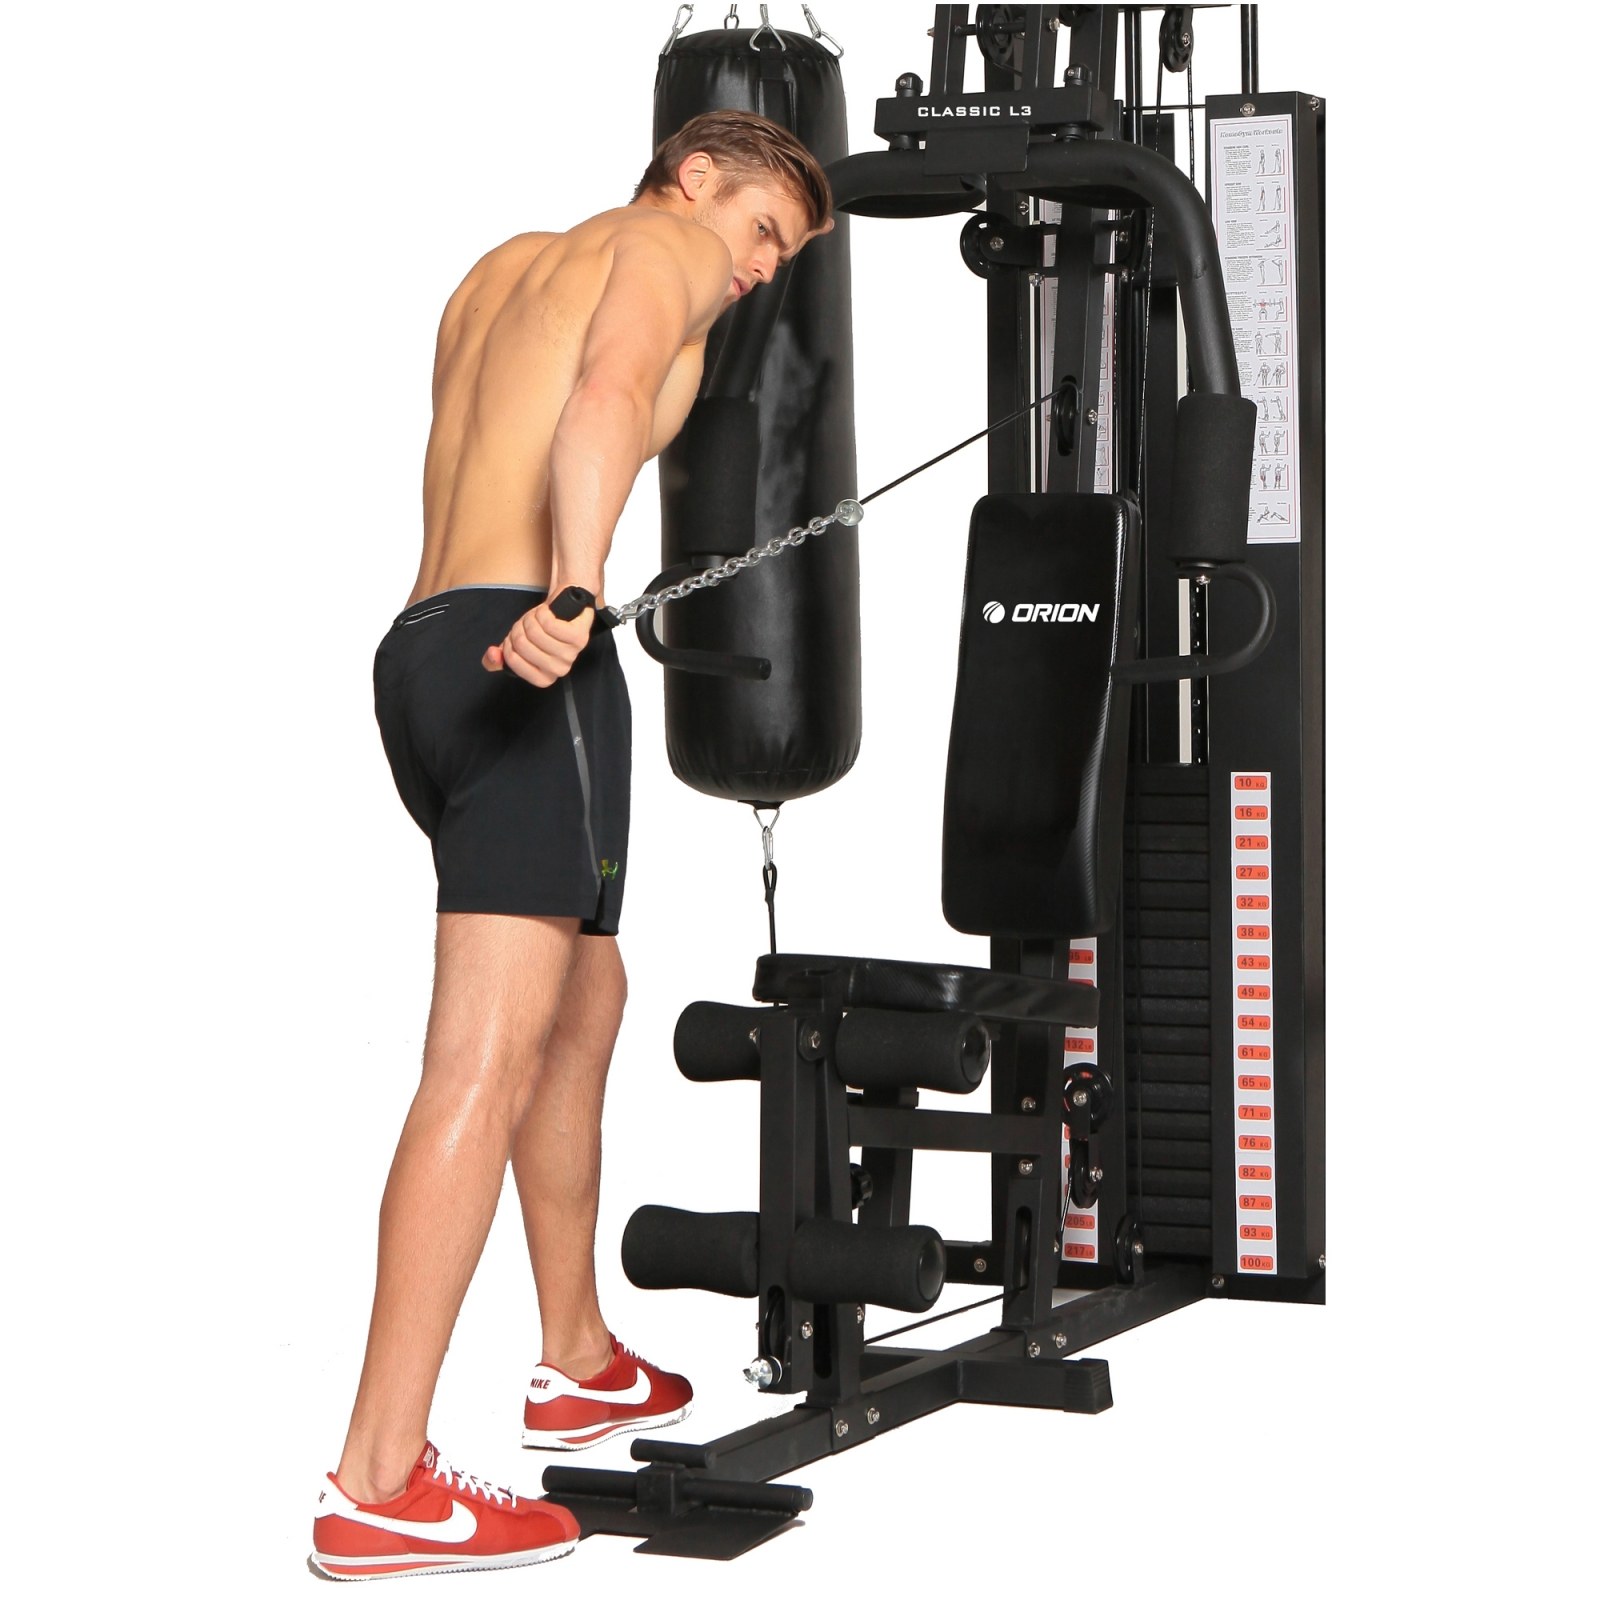 make worse Hear from platform Aparat multifunctional fitness Orion Classic L3